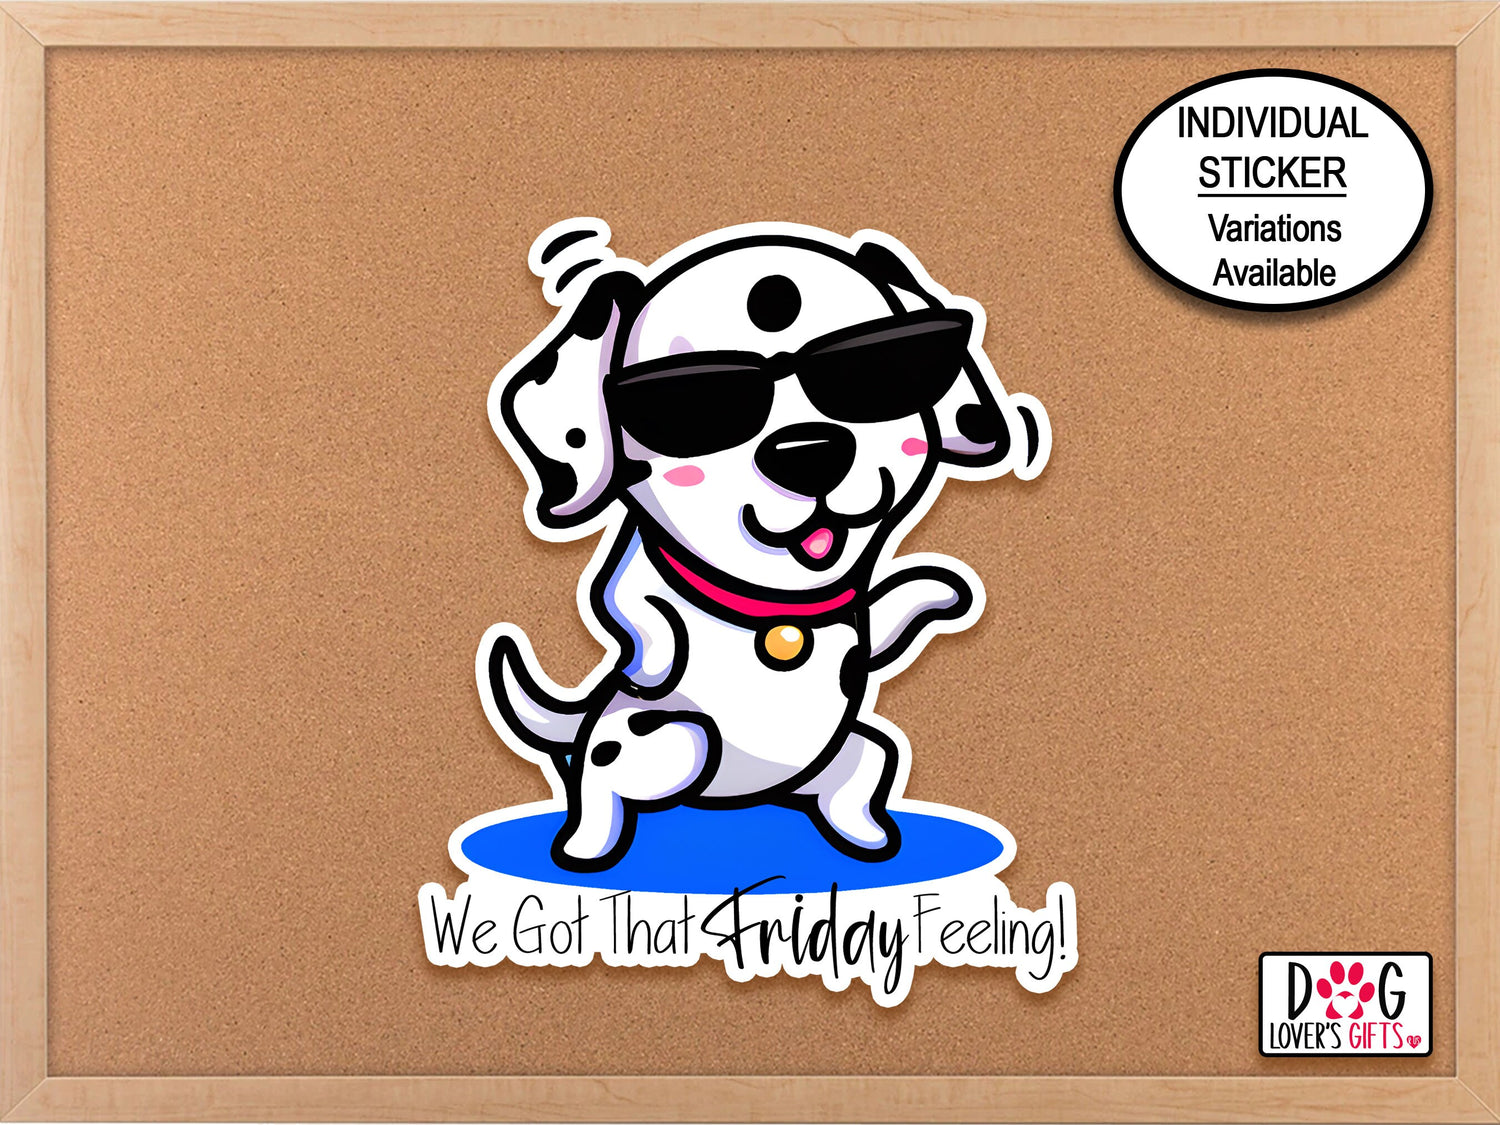 Die-Cut Stickers & Magnets - Dog Themed